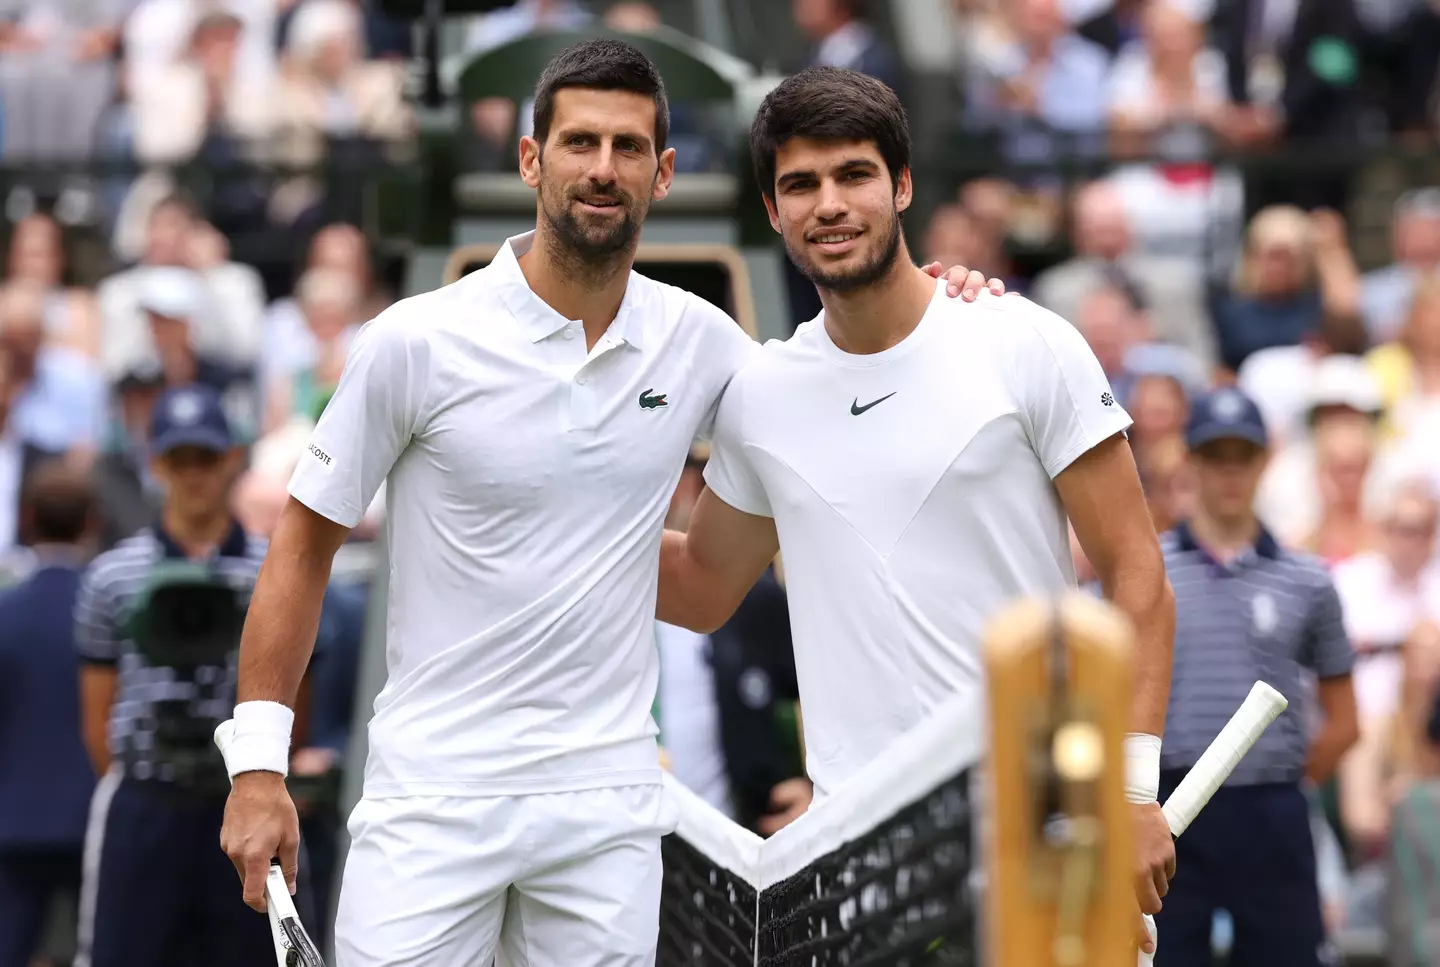 Novak Djokovic and Carlos Alcaraz pose for a photo ahead of their match. Image: Getty